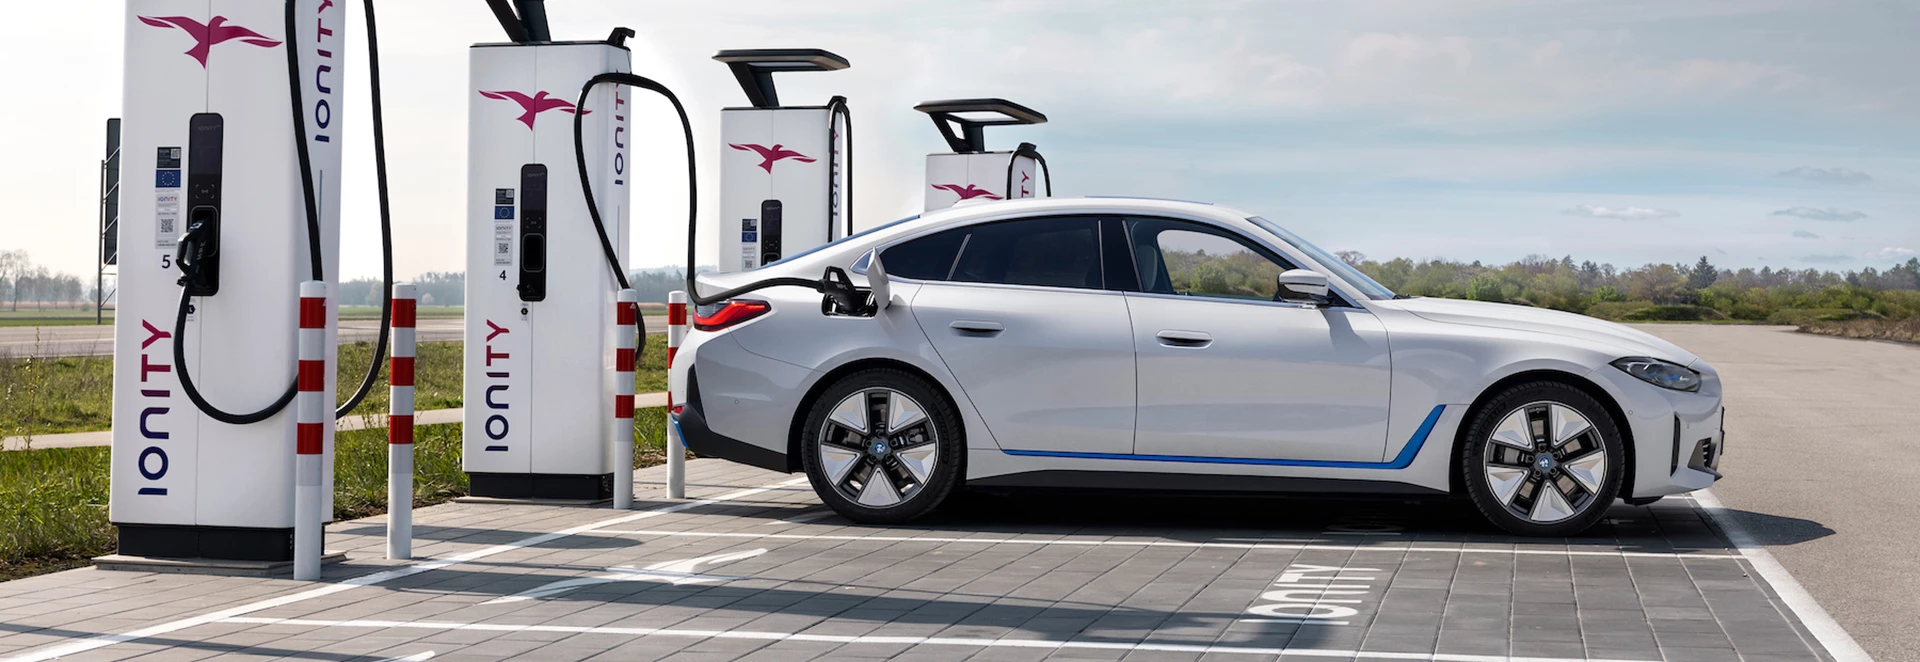 Major expansion of EV charging network announced 